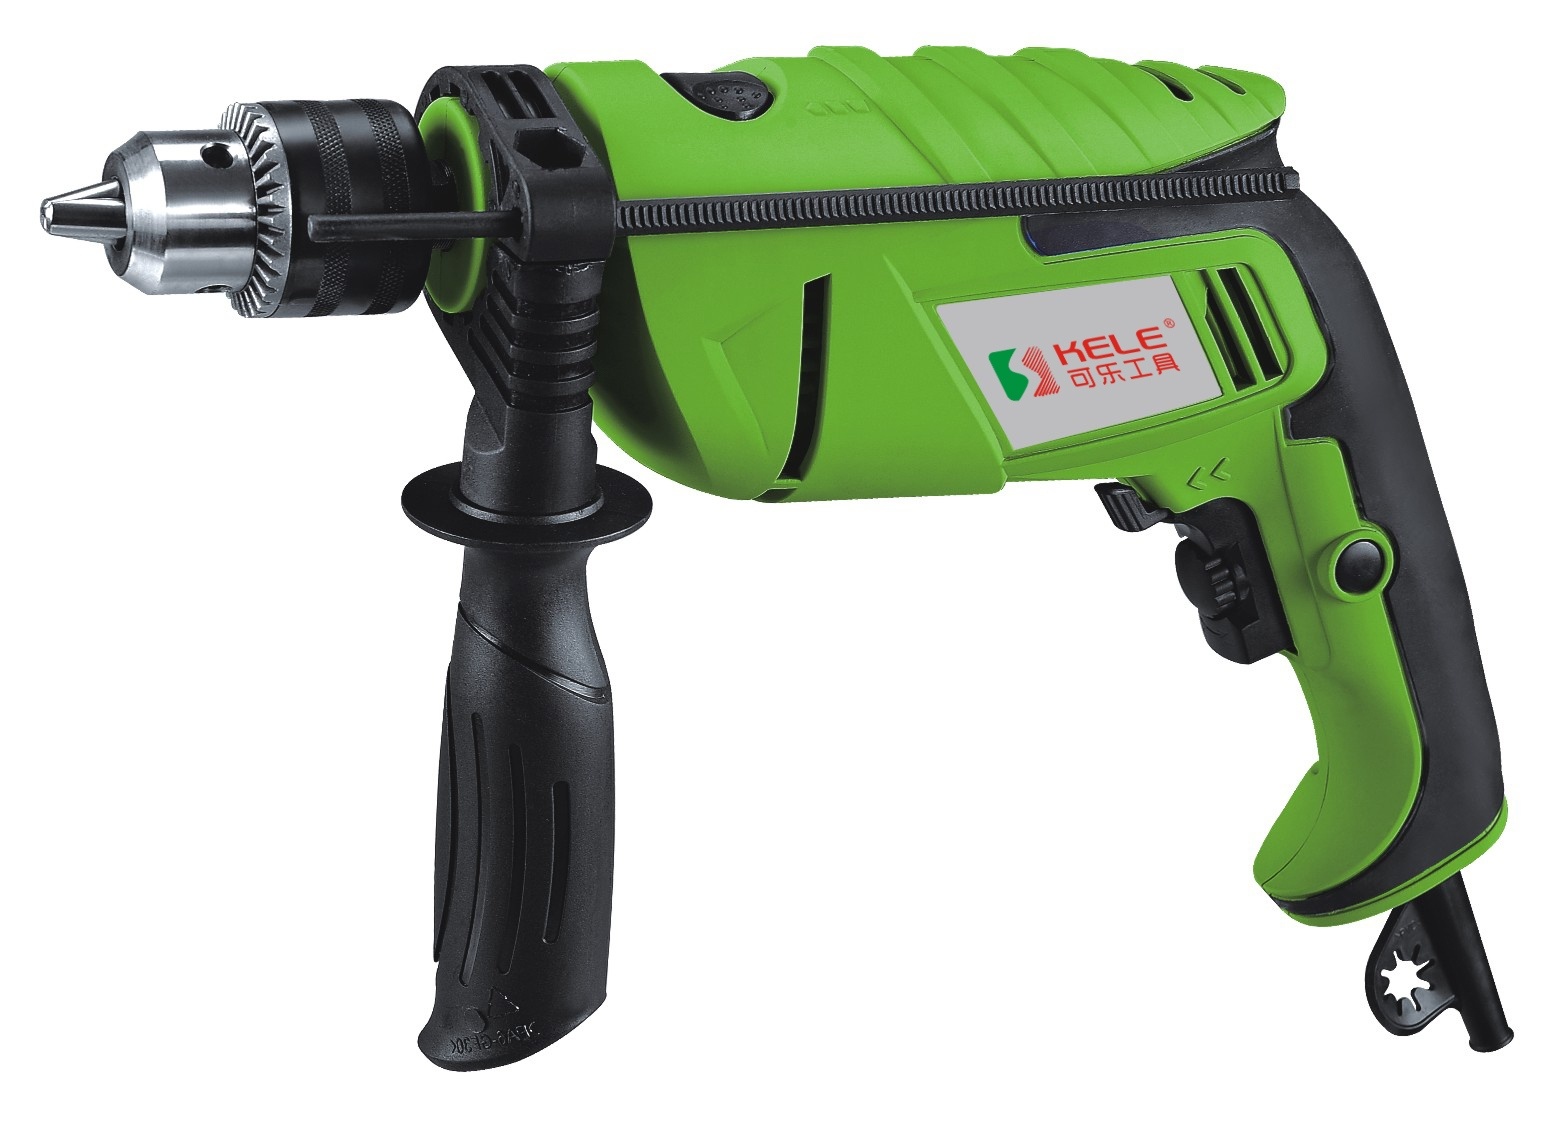 Professional Power Tool (Impact Drill, Max Drill Capacity 13mm, Power 1010W, with CE/EMC/RoHS)